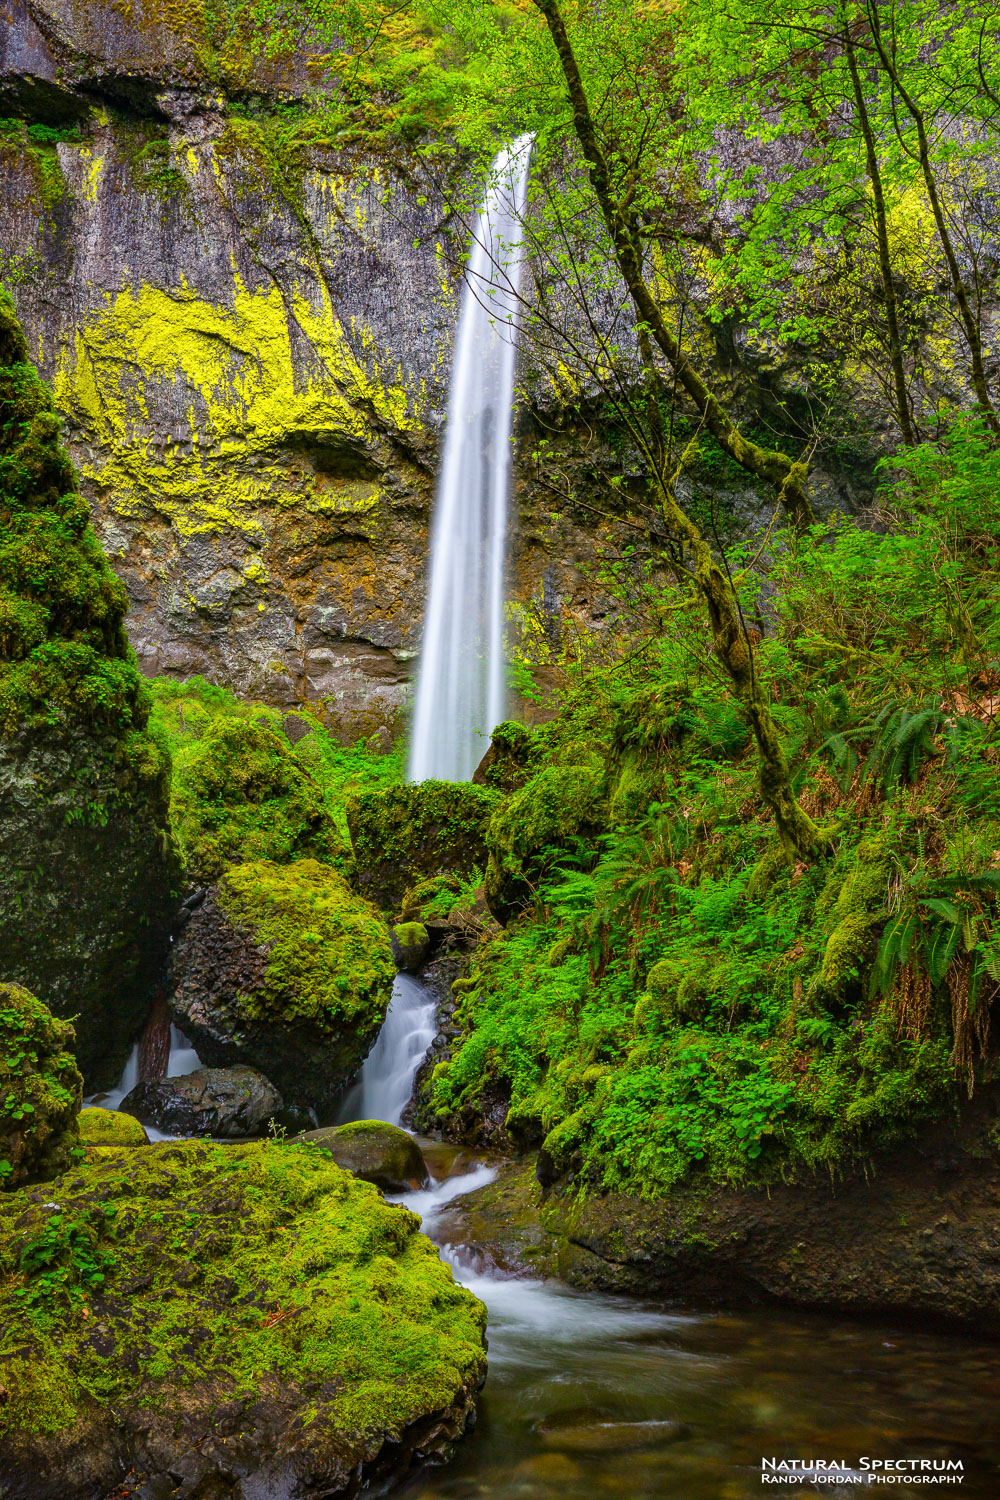 A more intimate view of Elowah Falls in the Columbia River Gorge National Scenic Area, Oregon.